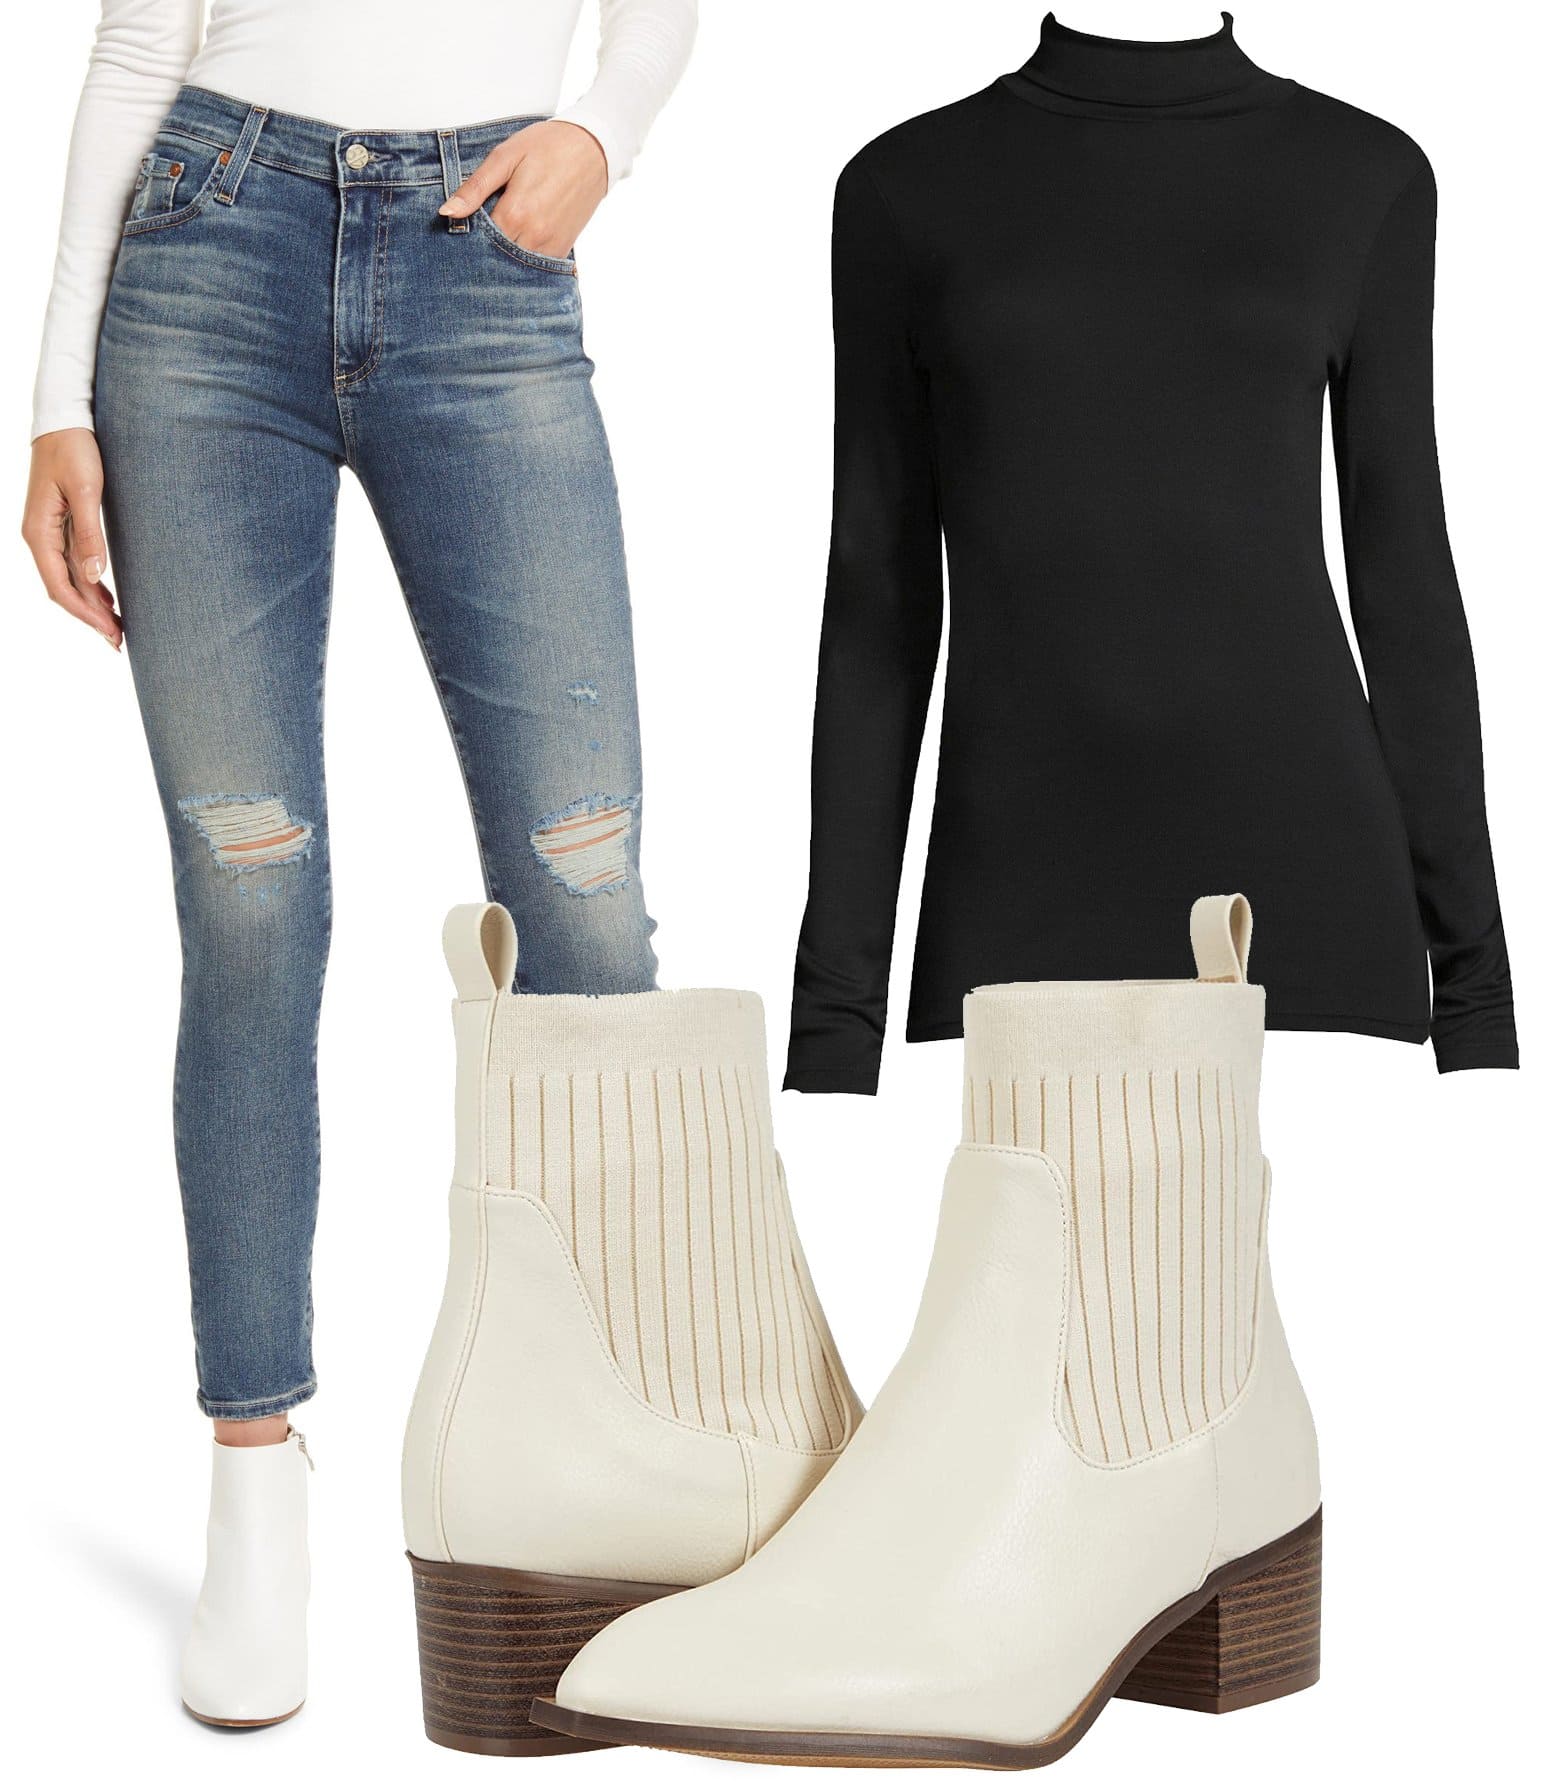 AG The Farrah Ankle Skinny Jeans, Splendid Knit Turtleneck Top, CL By Laundry Core Ankle Boots